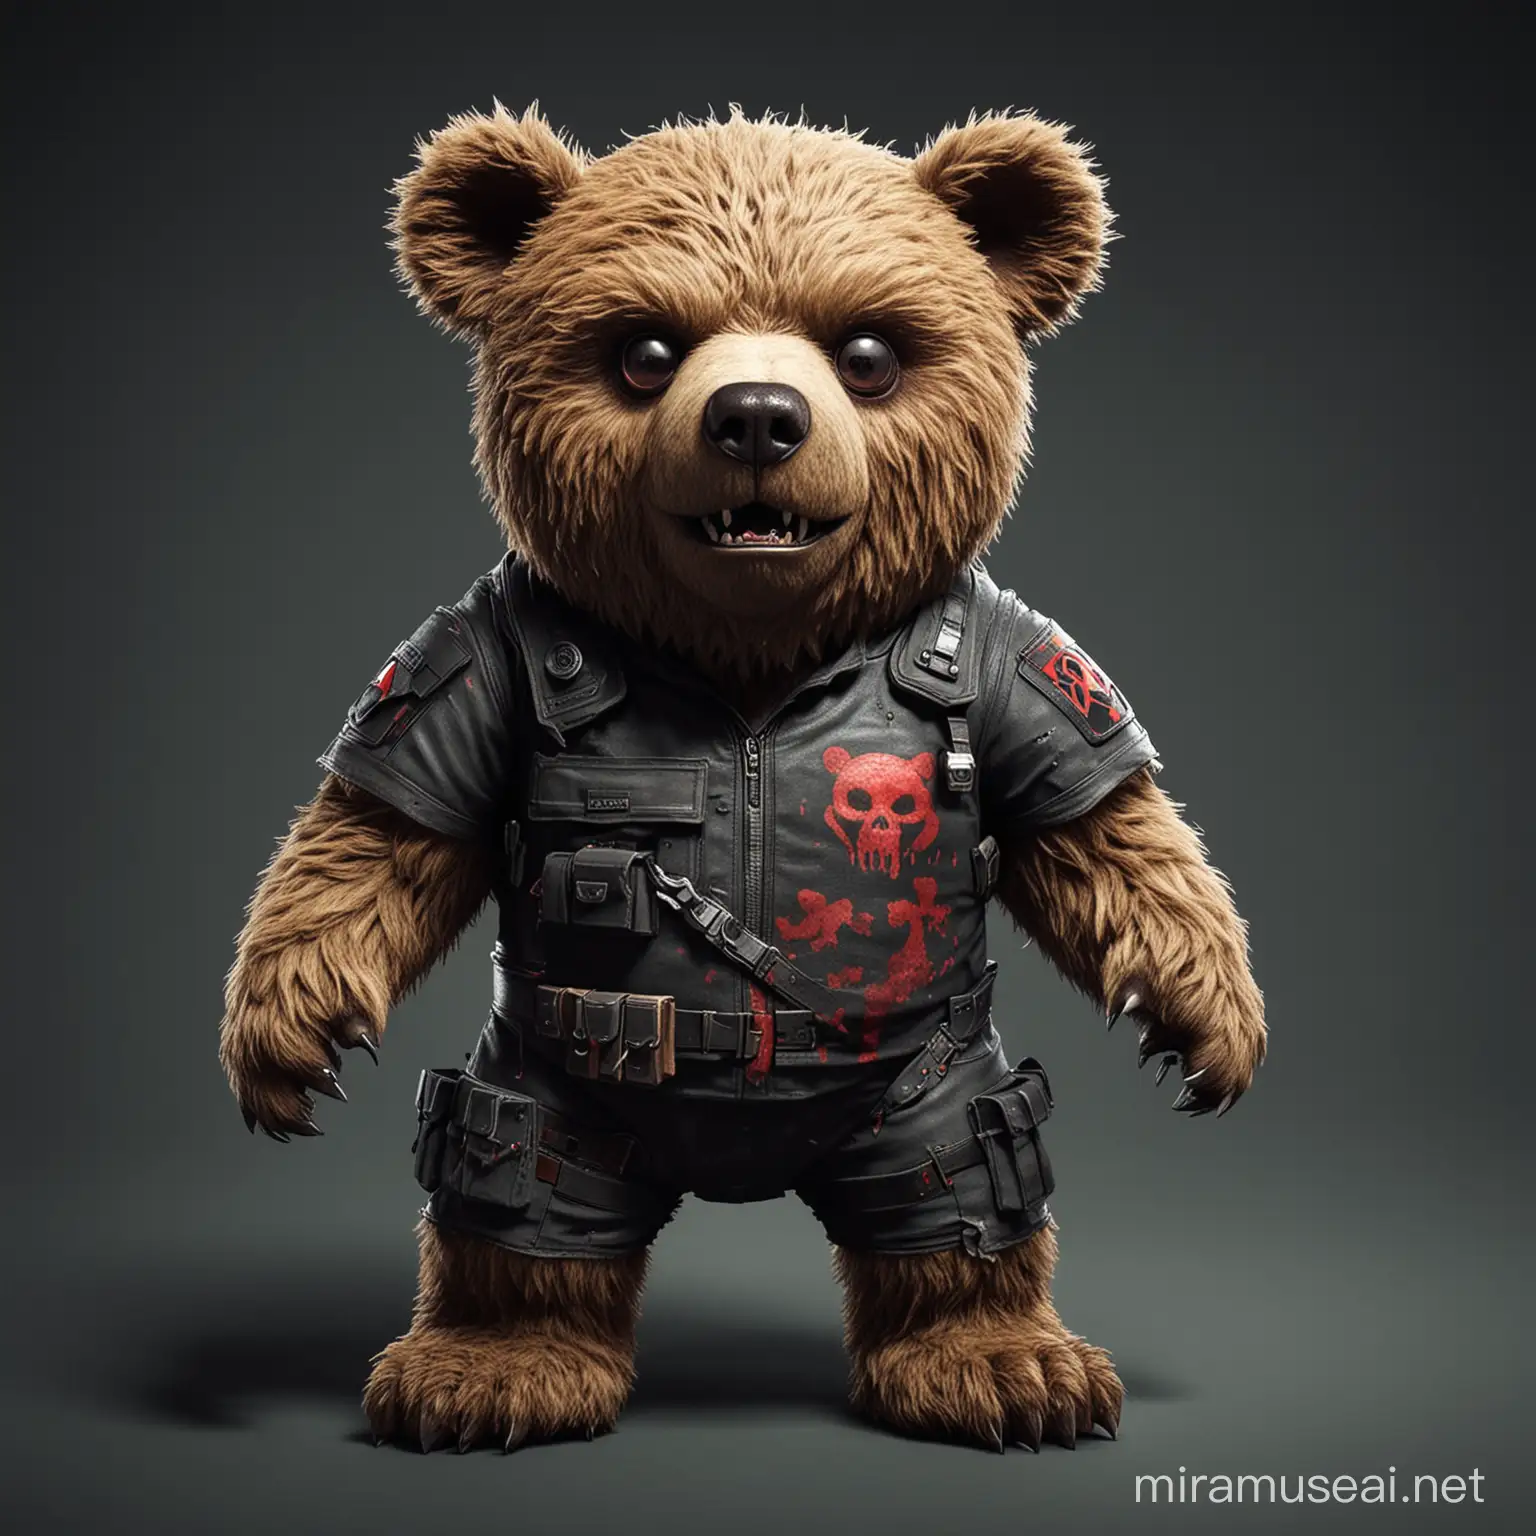 Zombie bear in the style of Resident Evil.